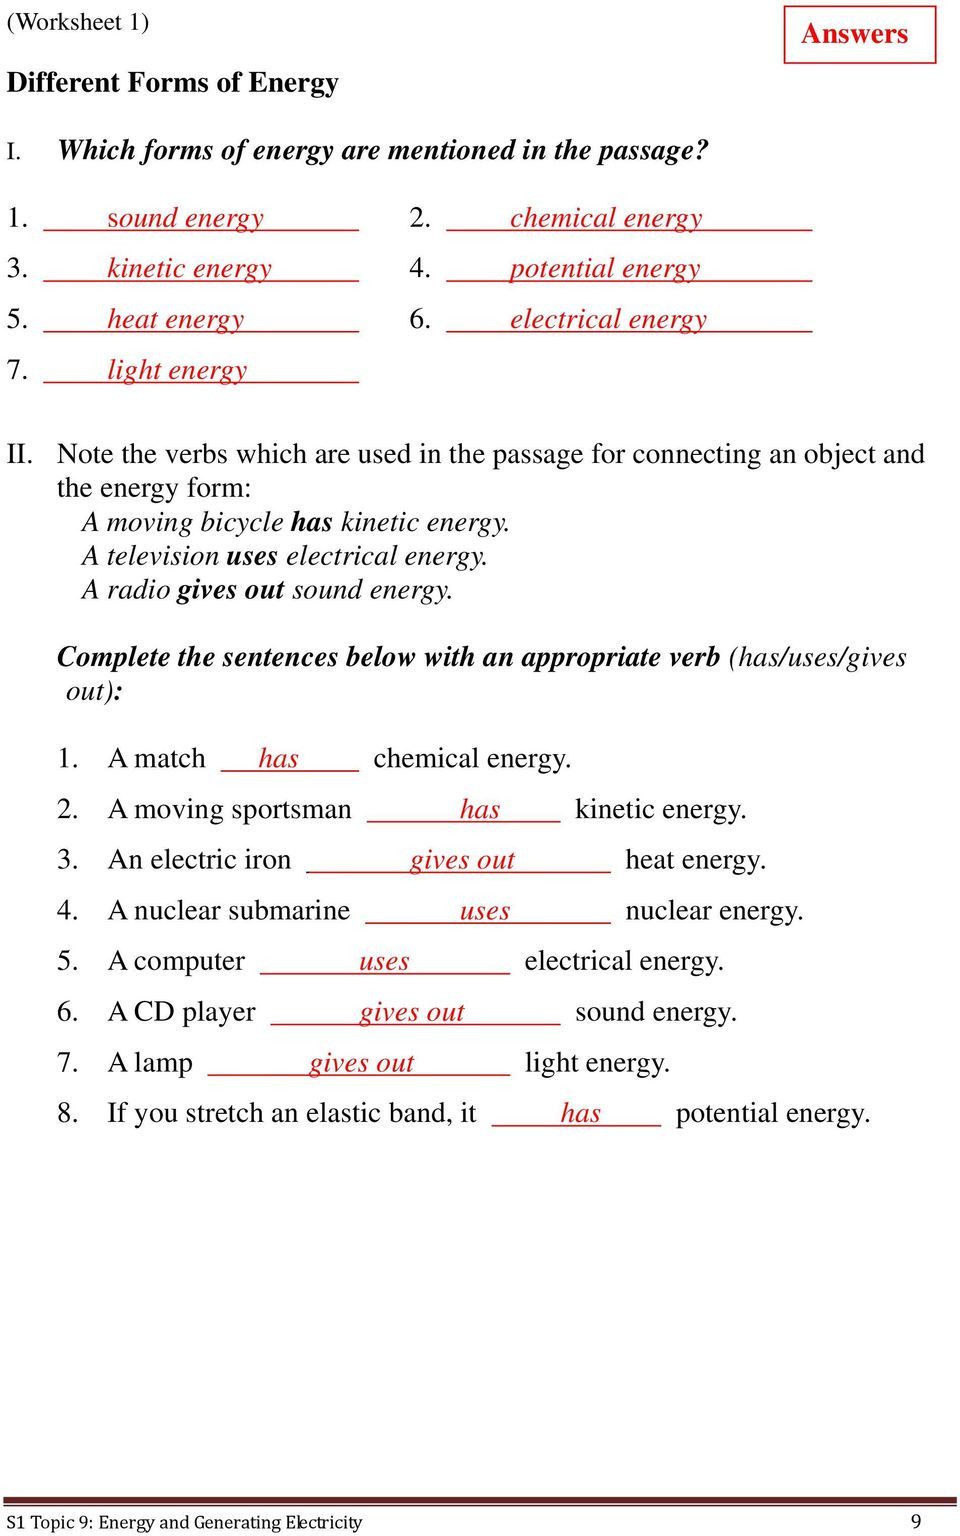 Electrical Power Worksheet Answers S1 topic 9 Energy and Generating Electricity Level S1